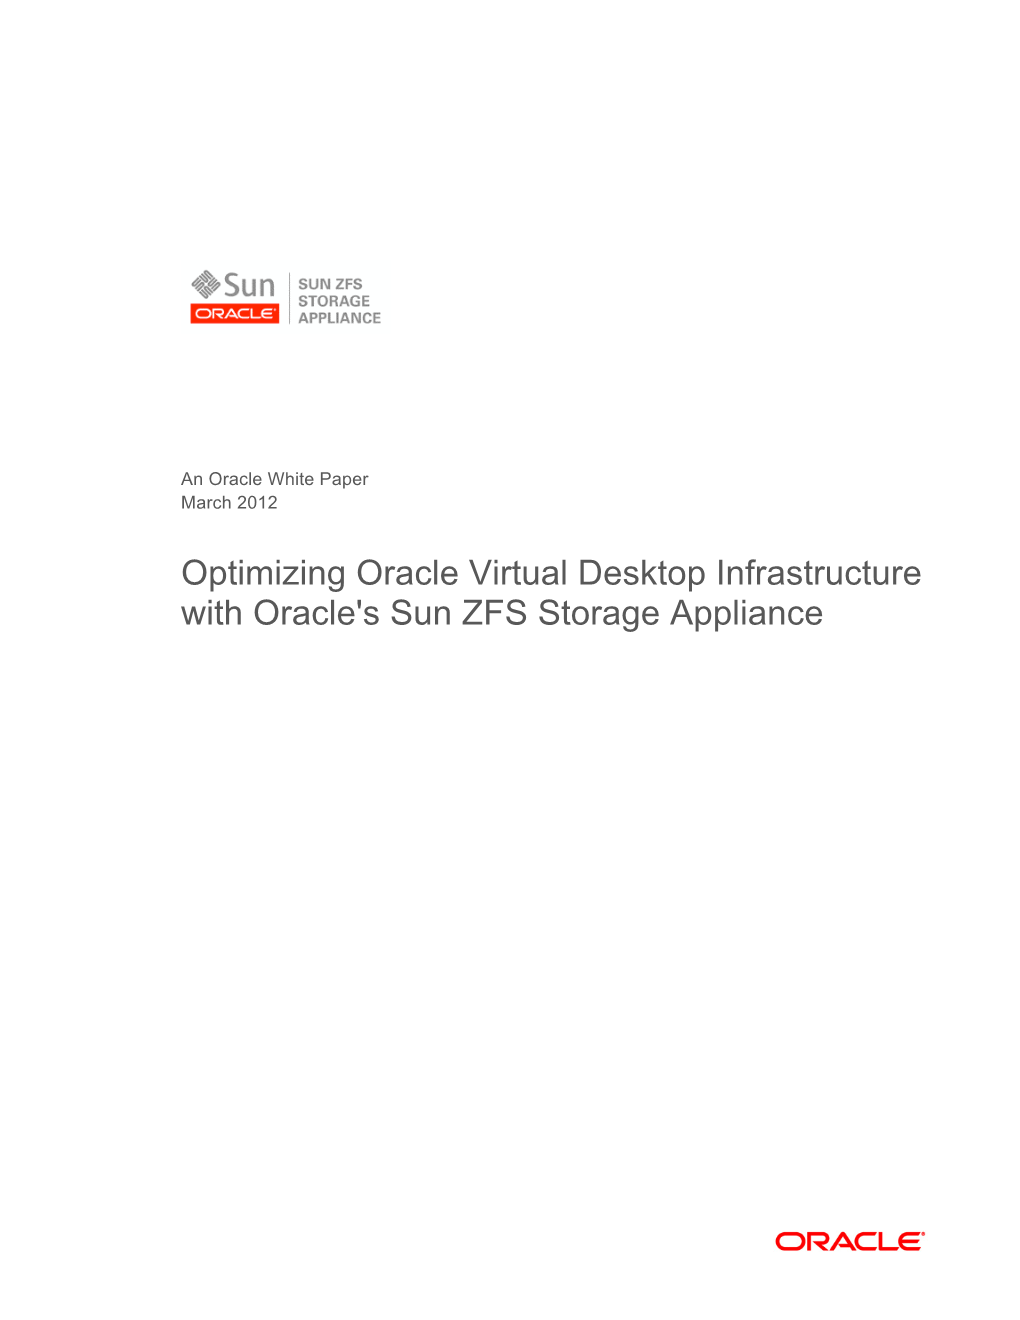 Optimizing Oracle Virtual Desktop Infrastructure with Oracle's Sun ZFS Storage Appliance